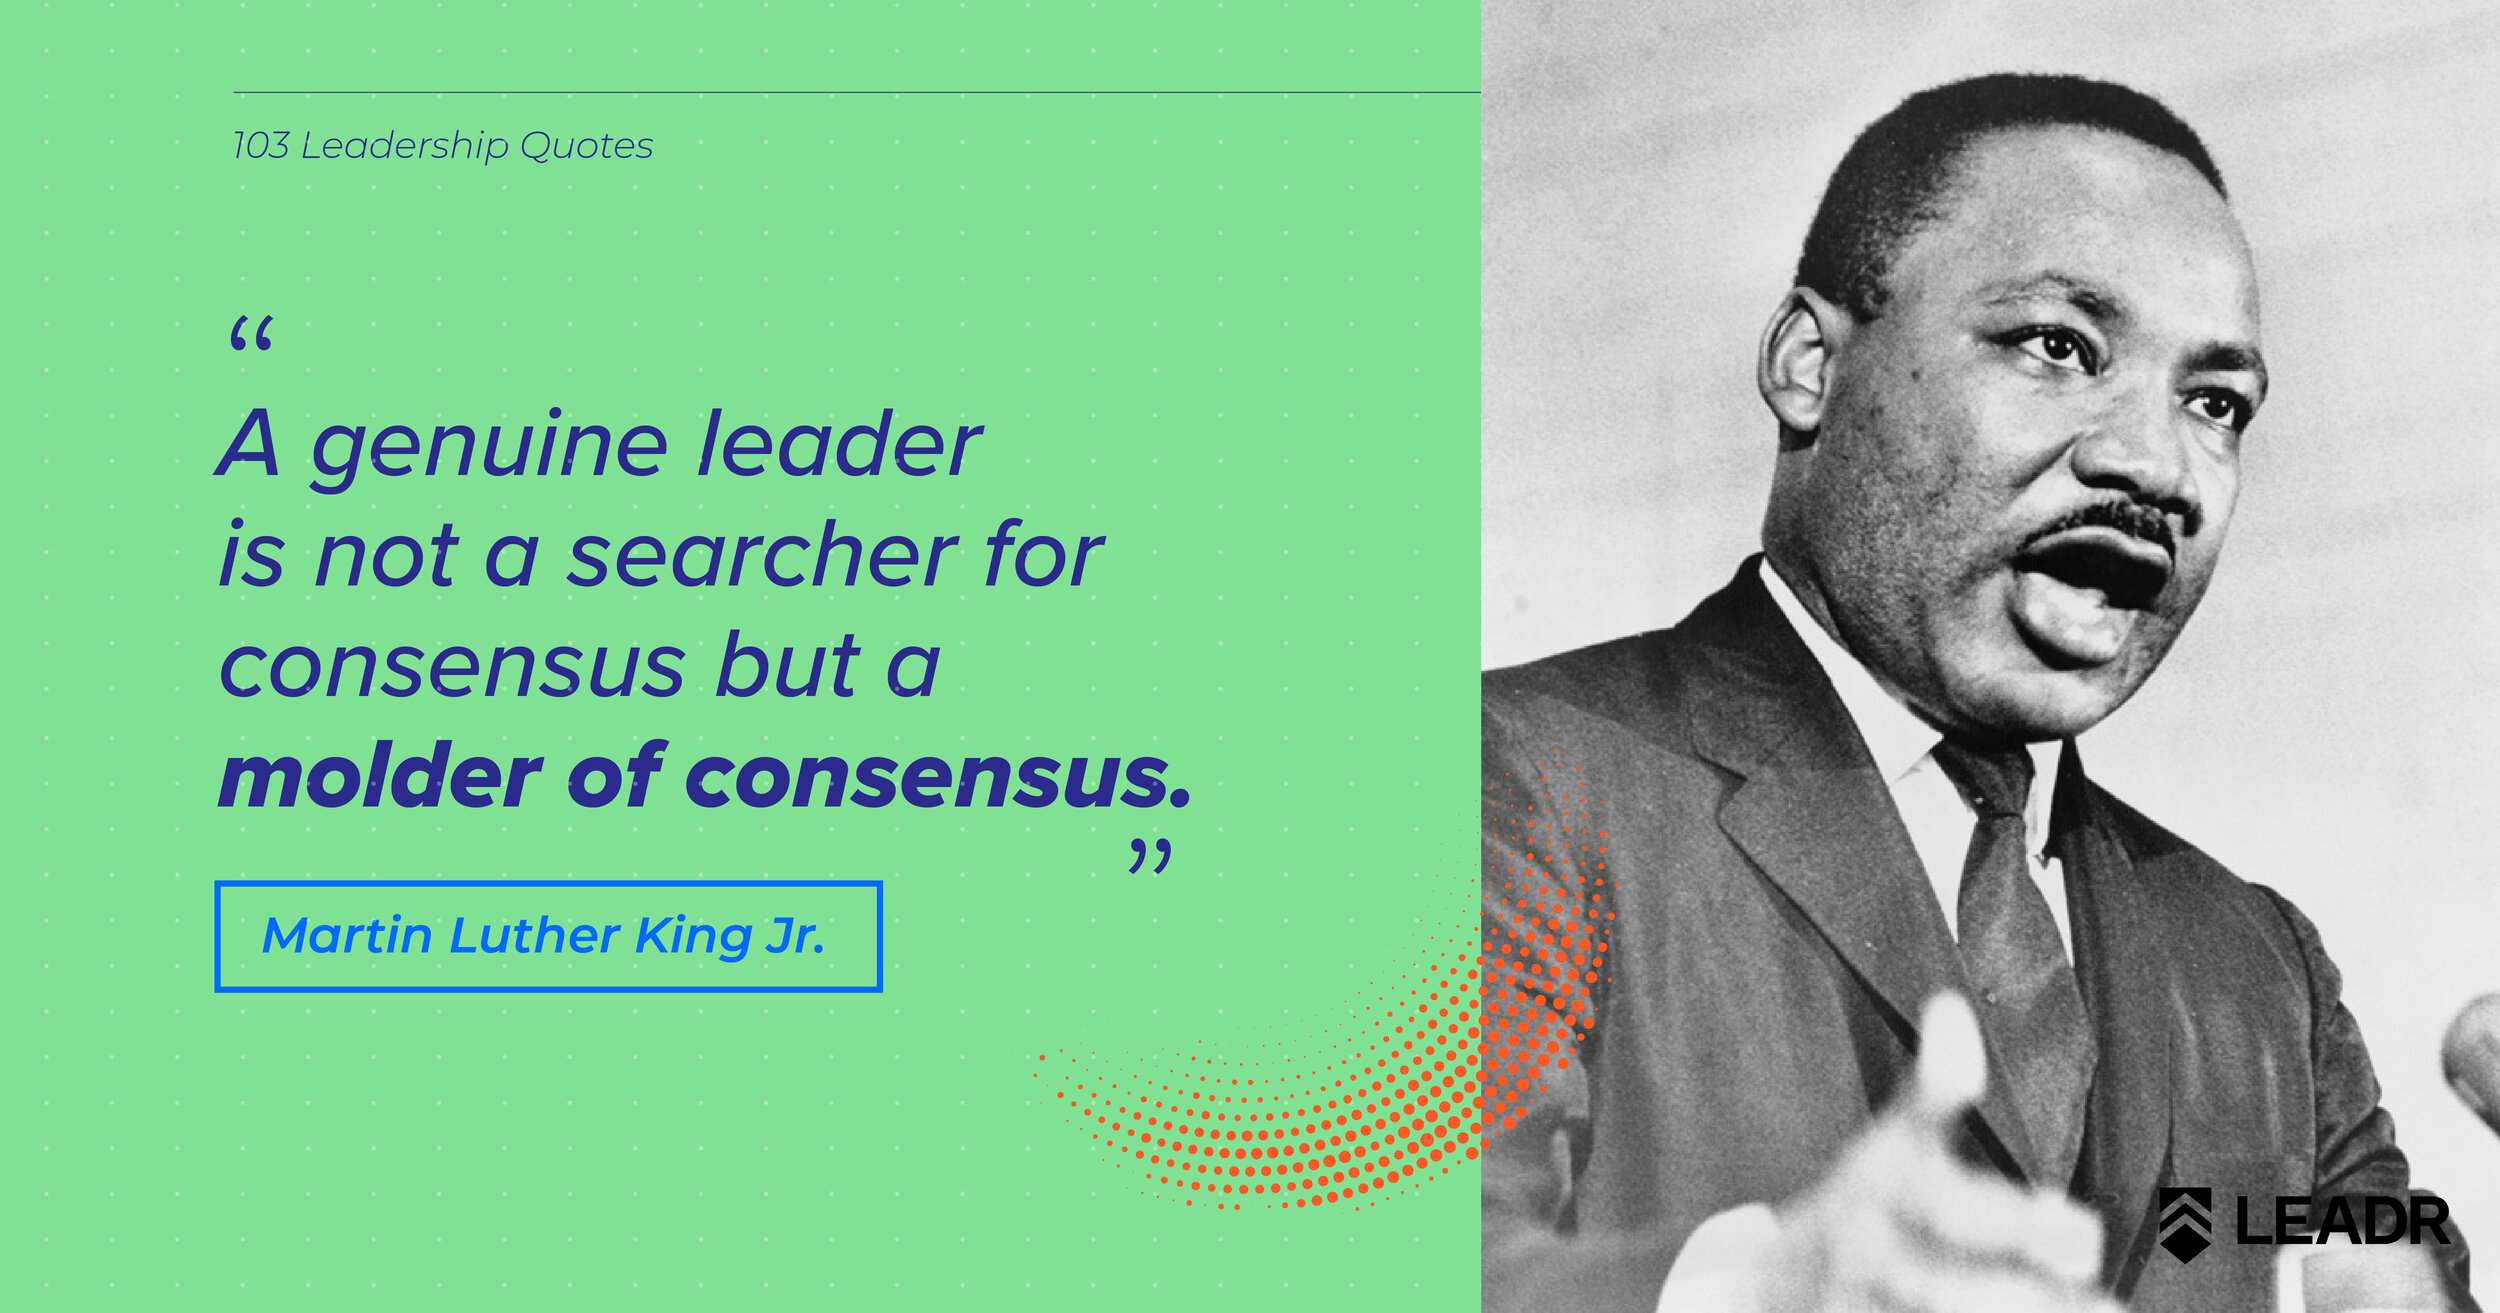 Royalty free downloadable leadership quotes - Dr. Martin Luther King Jr.